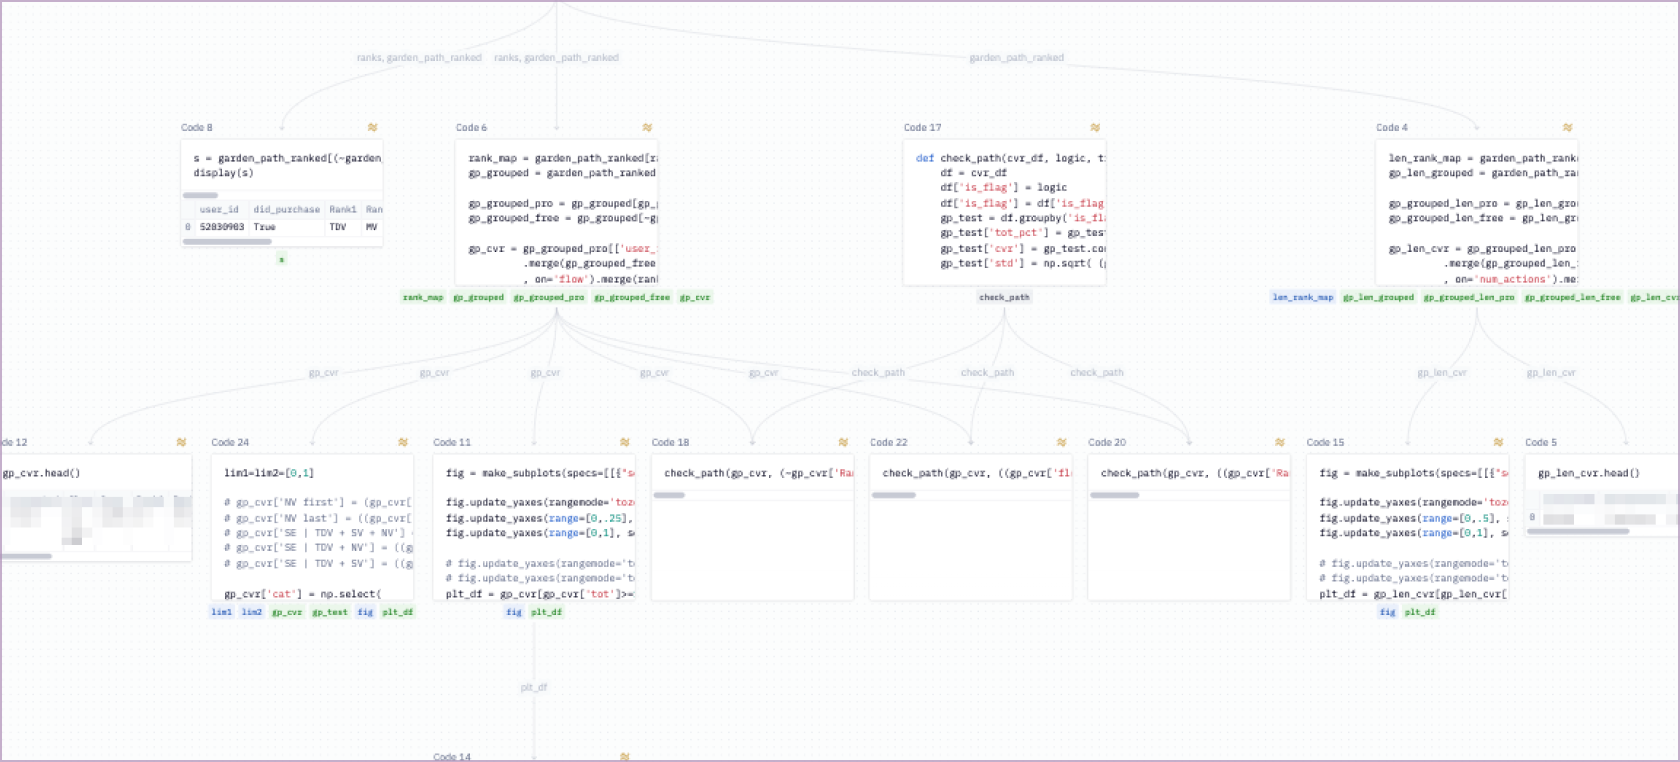 Hex’s dependency graph makes it easy to debug & simplify notebooks.